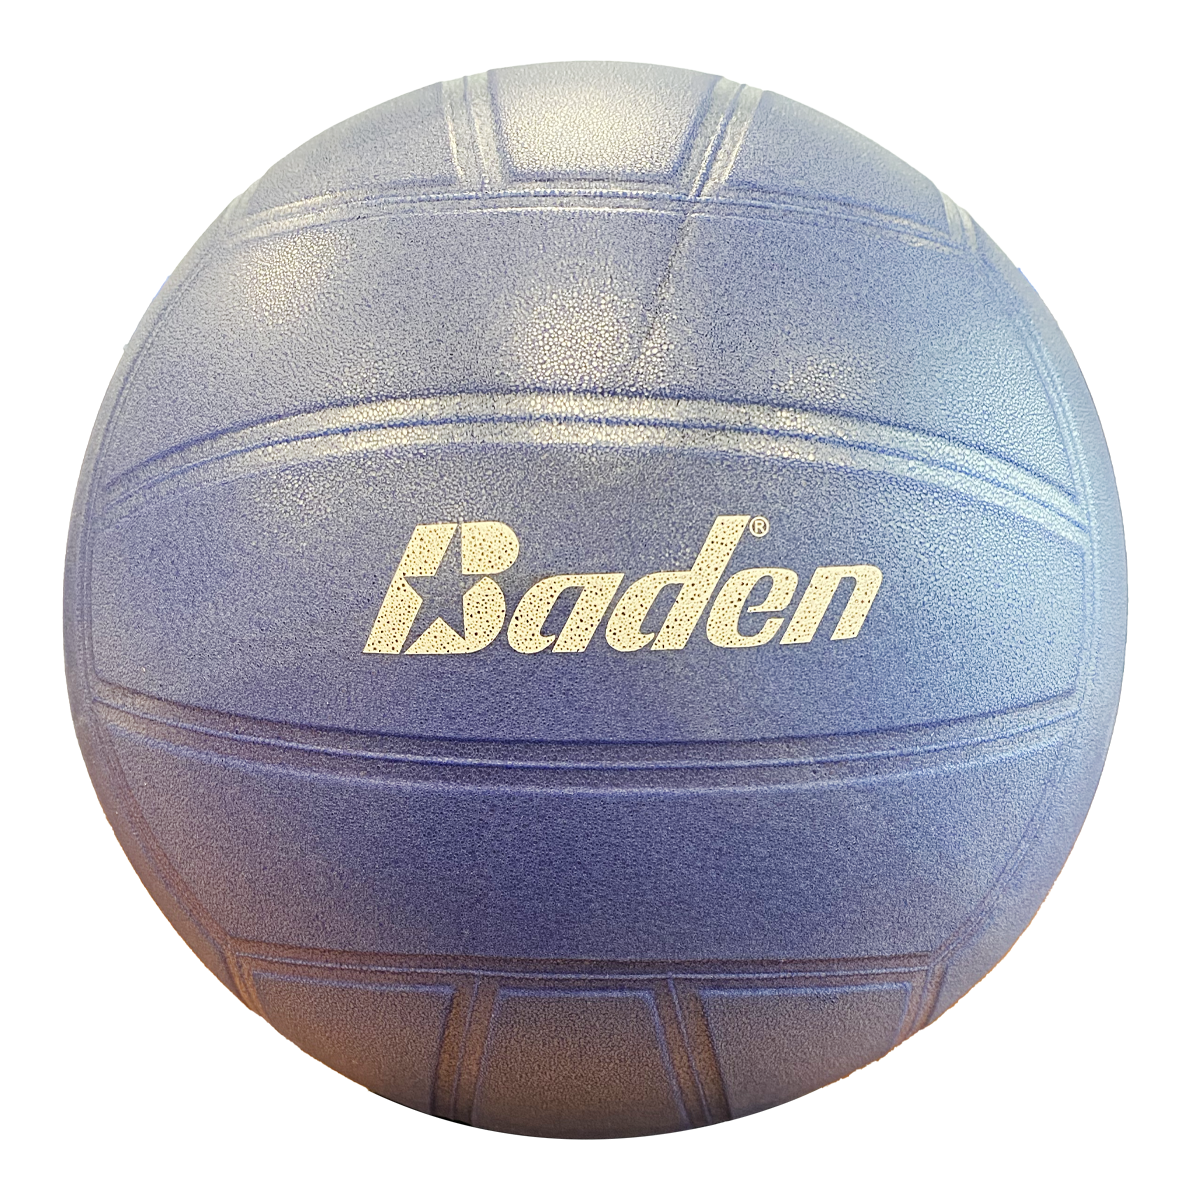 Super soft foamed PVC volleyball